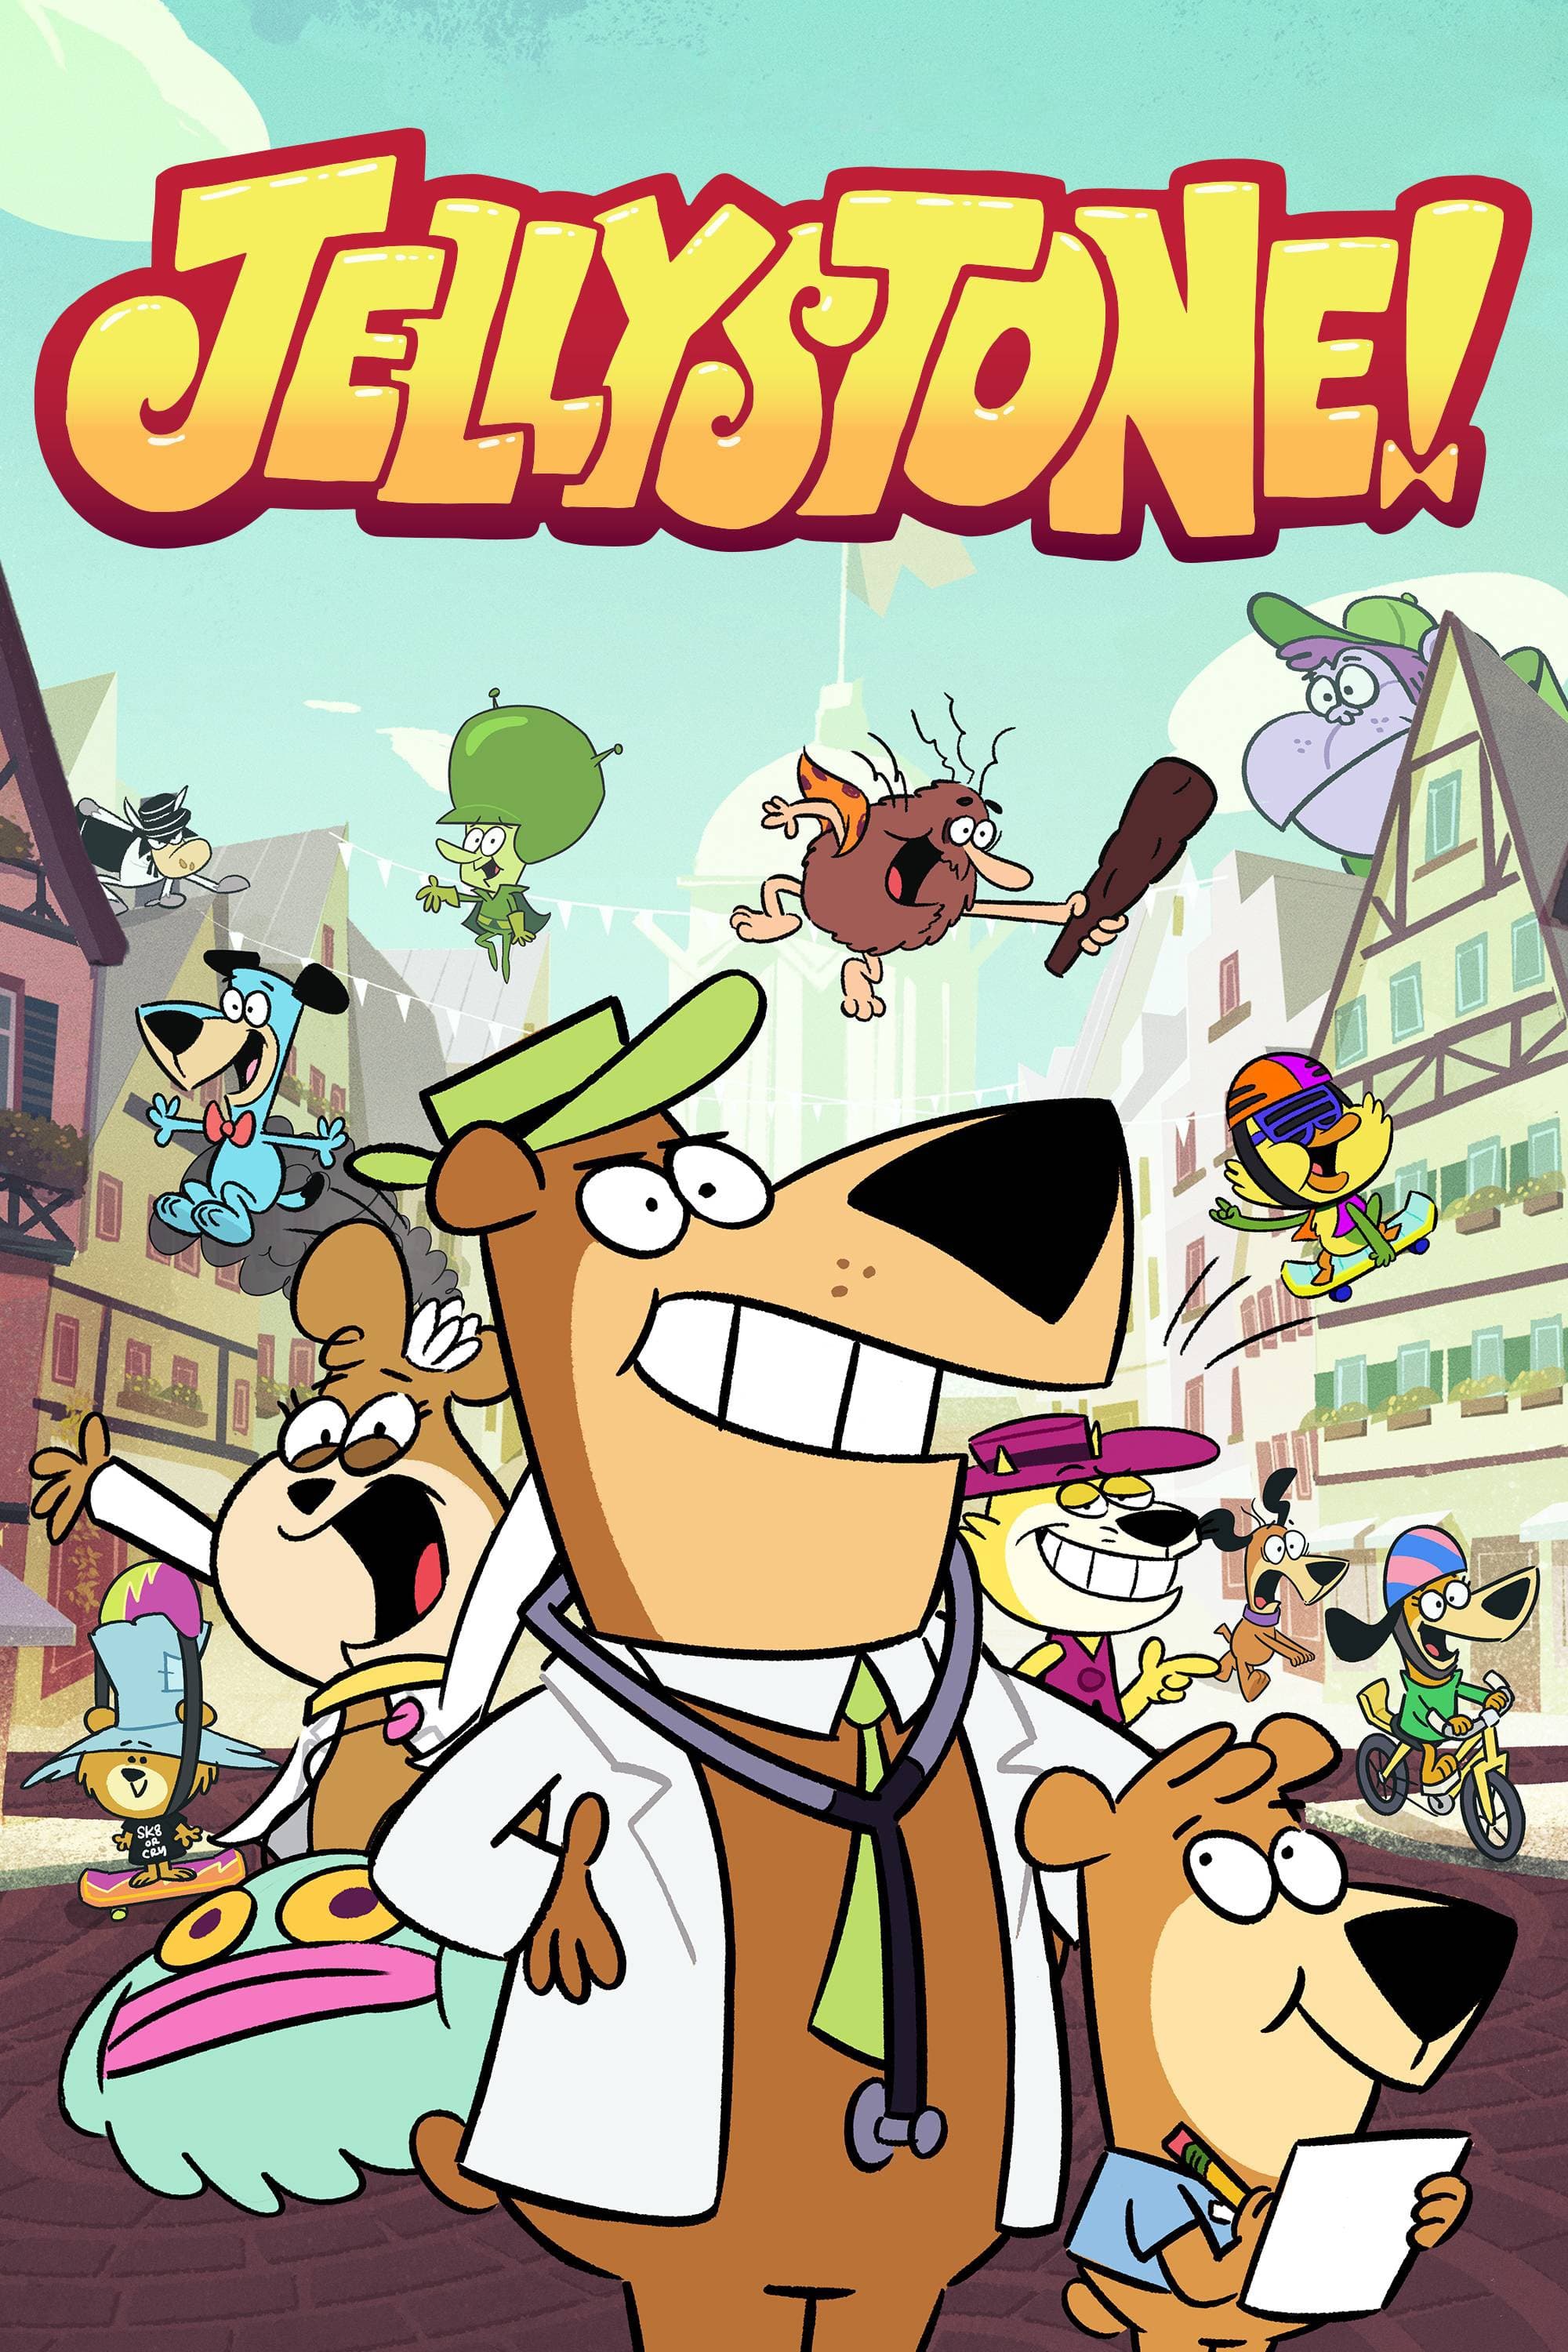 Jellystone! TV Shows About Animal